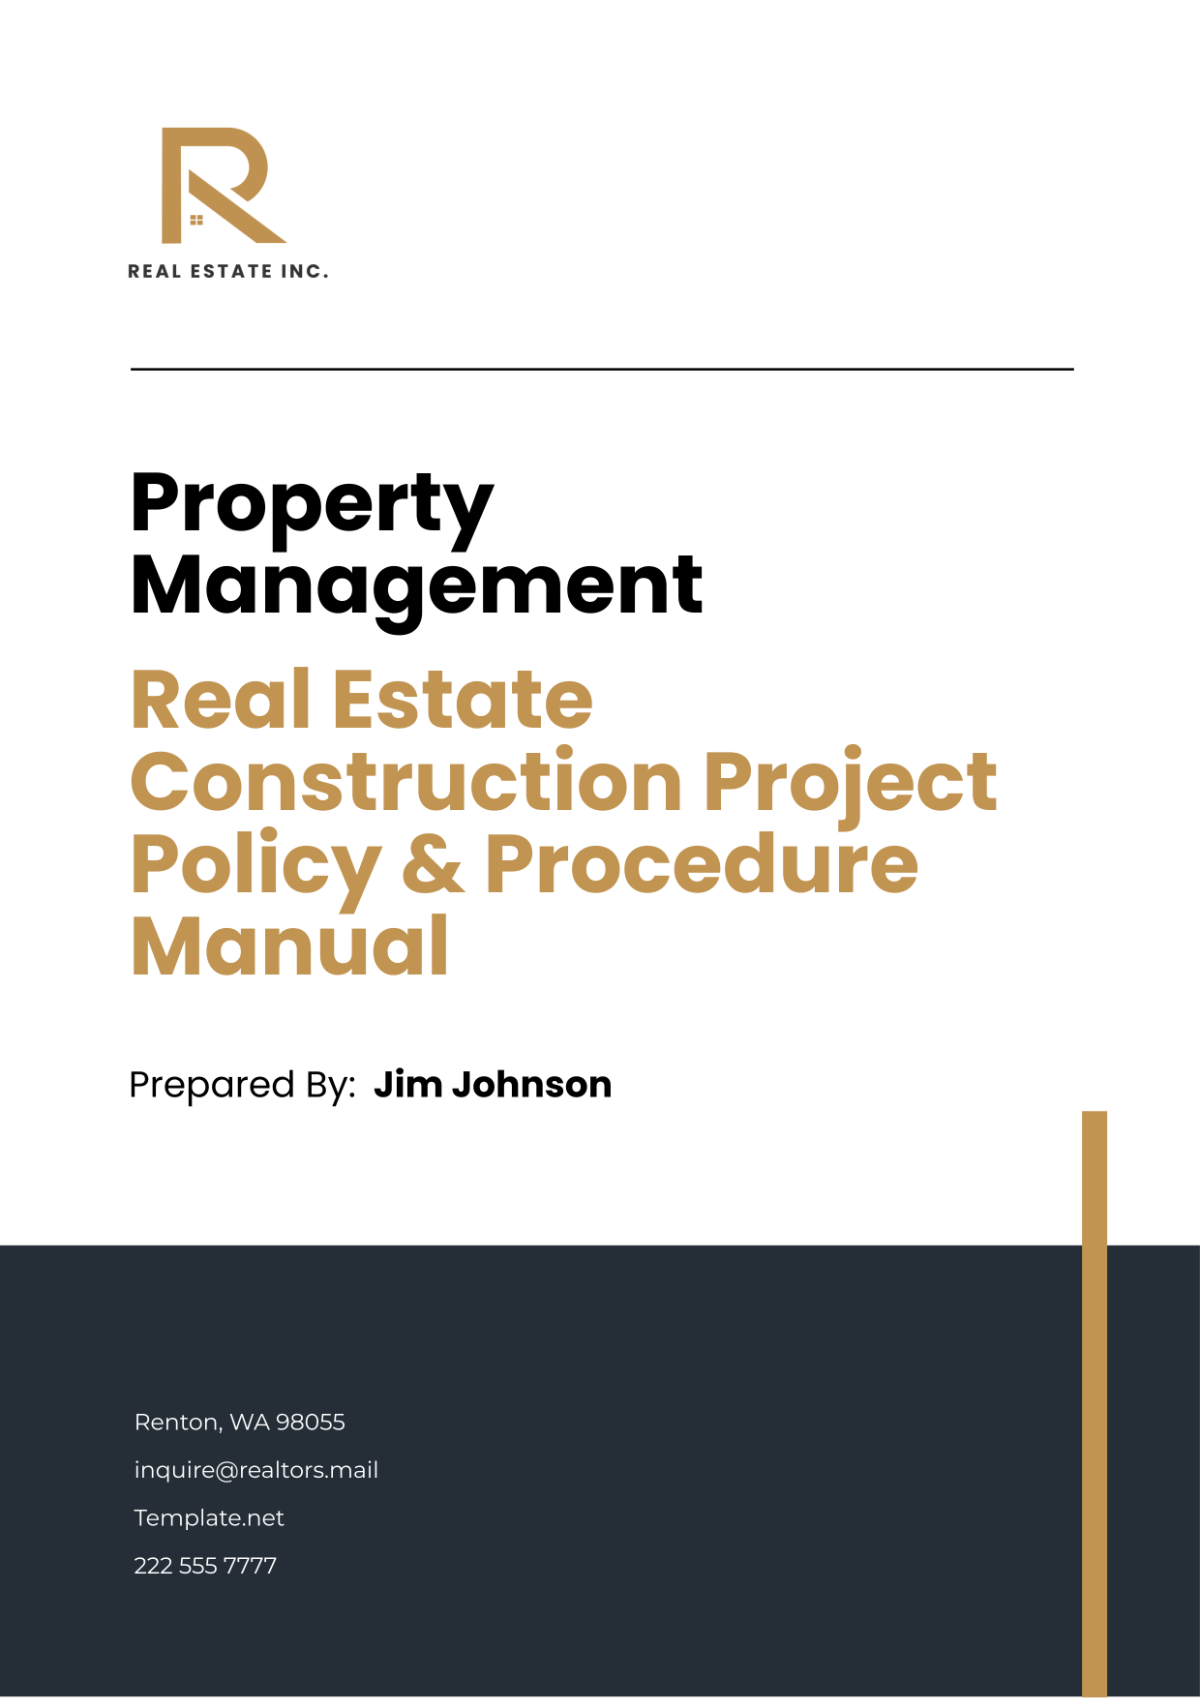 Real Estate Construction Project Policy & Procedure Manual Template